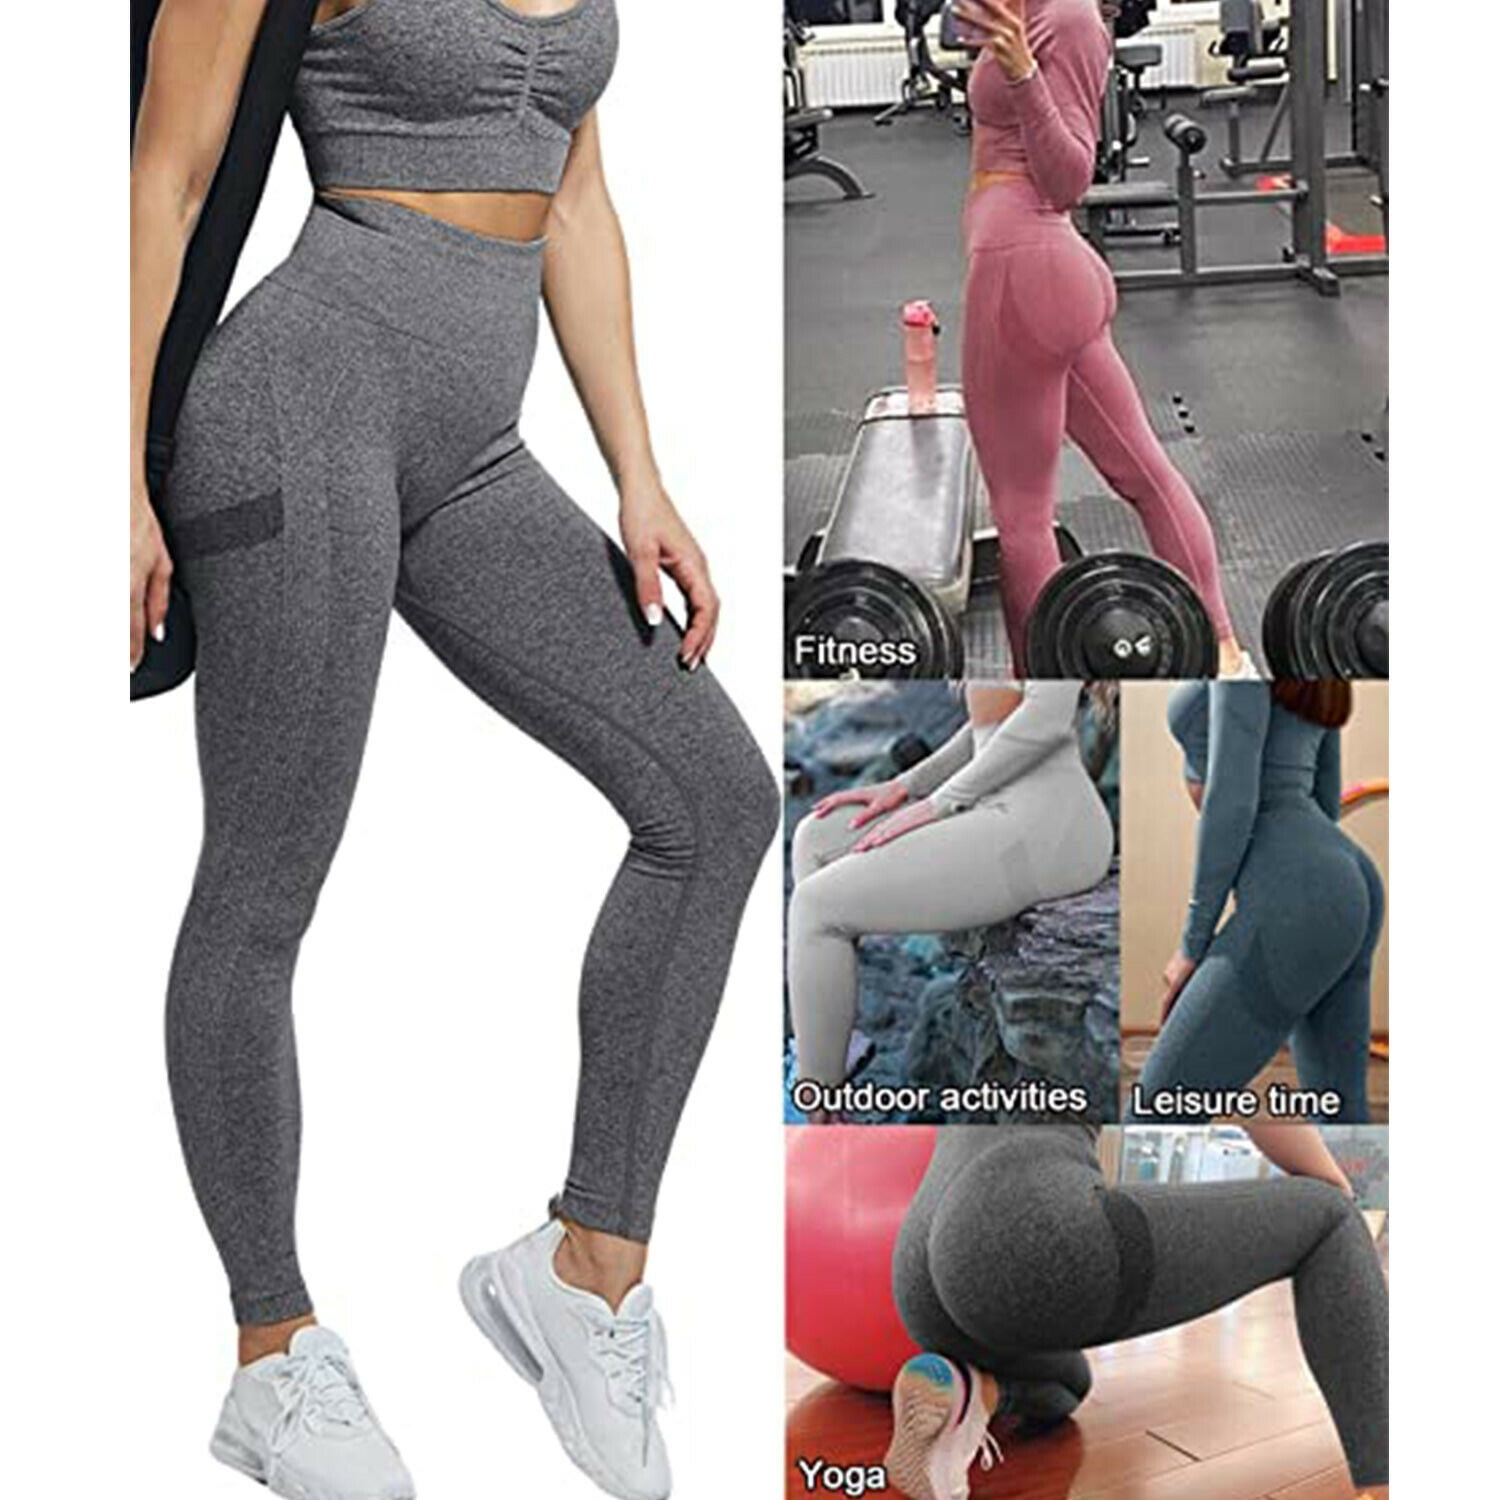 Ilfioreemio Butt Scrunch Seamless Leggings for Women High Waisted Booty  Workout Yoga Pants Ruched Butt Lift Textured Tights